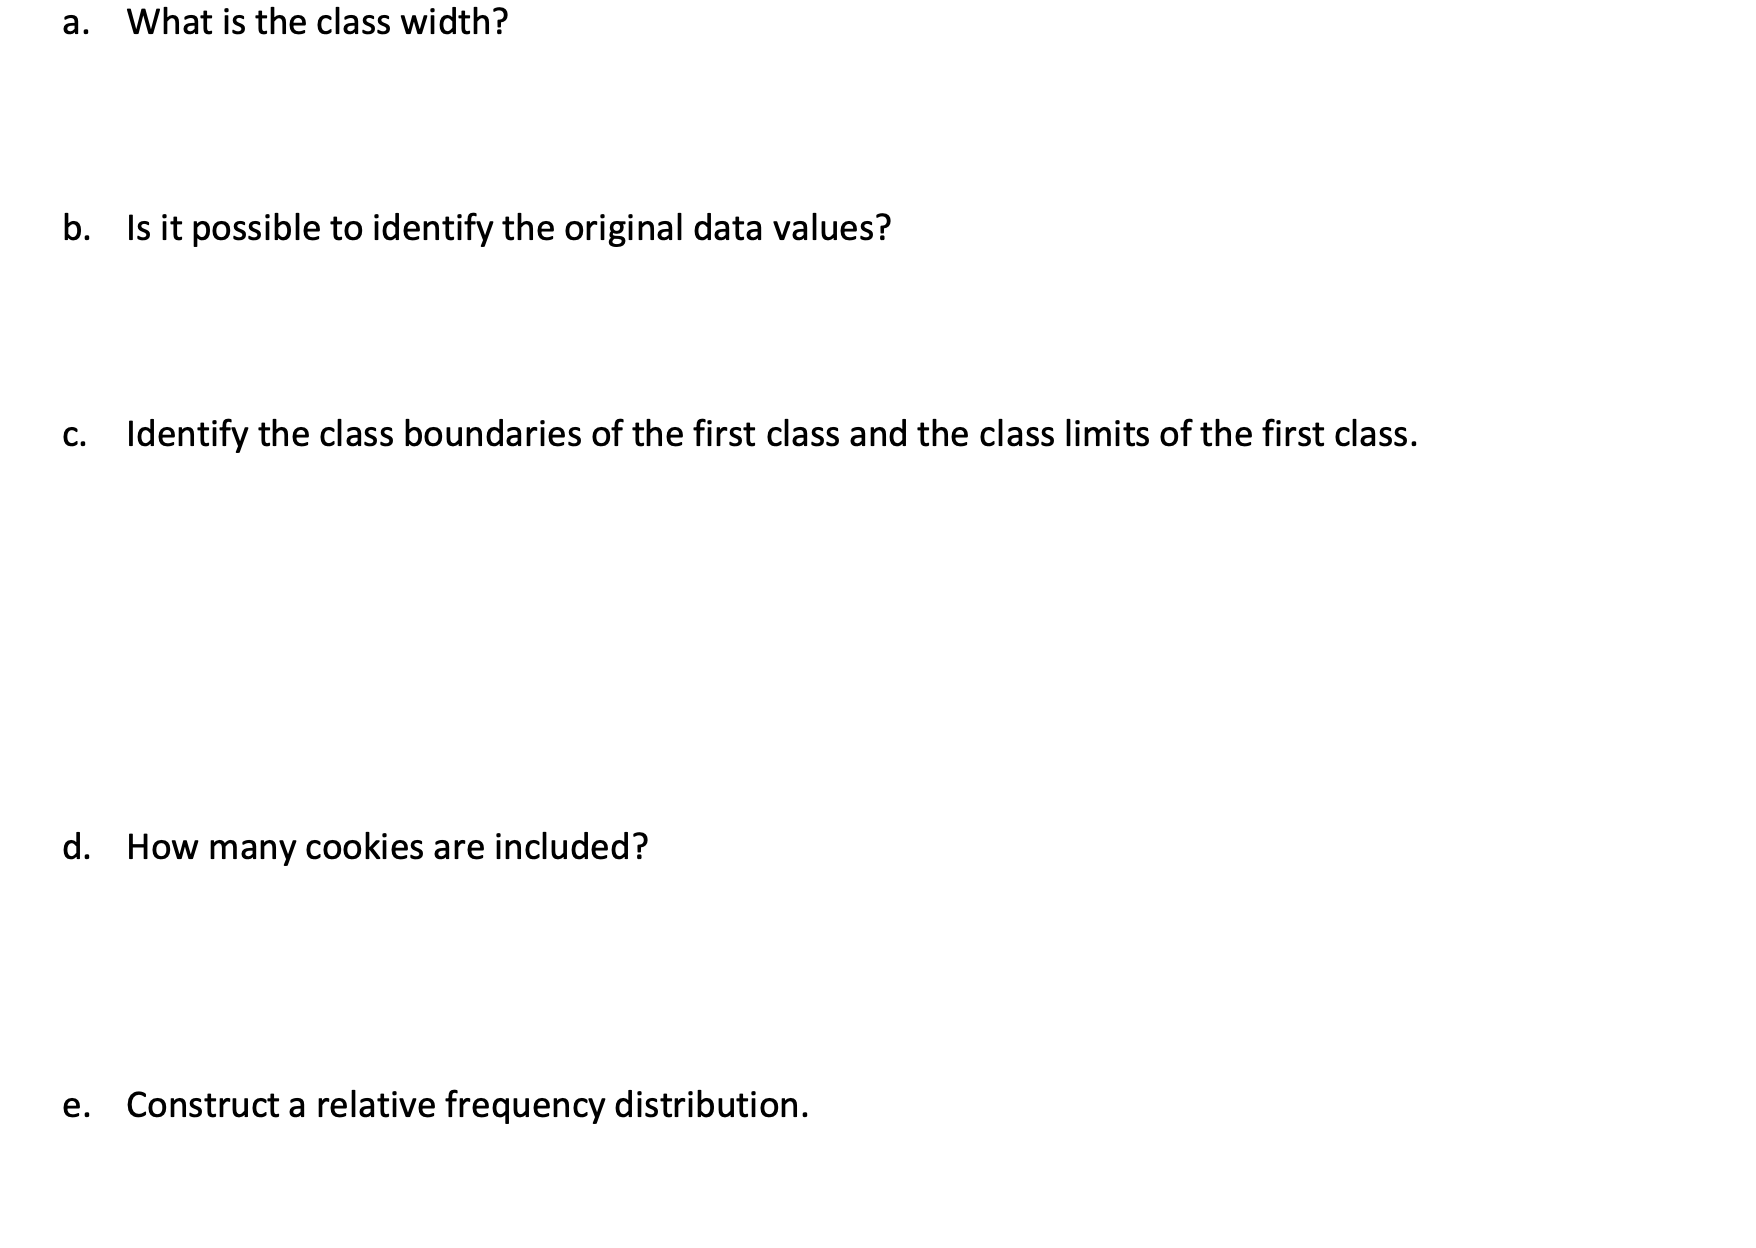 а.
What is the class width?
b. Is it possible to identify the original data values?
С.
Identify the class boundaries of the first class and the class limits of the first class.
d. How many cookies are included?
е.
Construct a relative frequency distribution.
